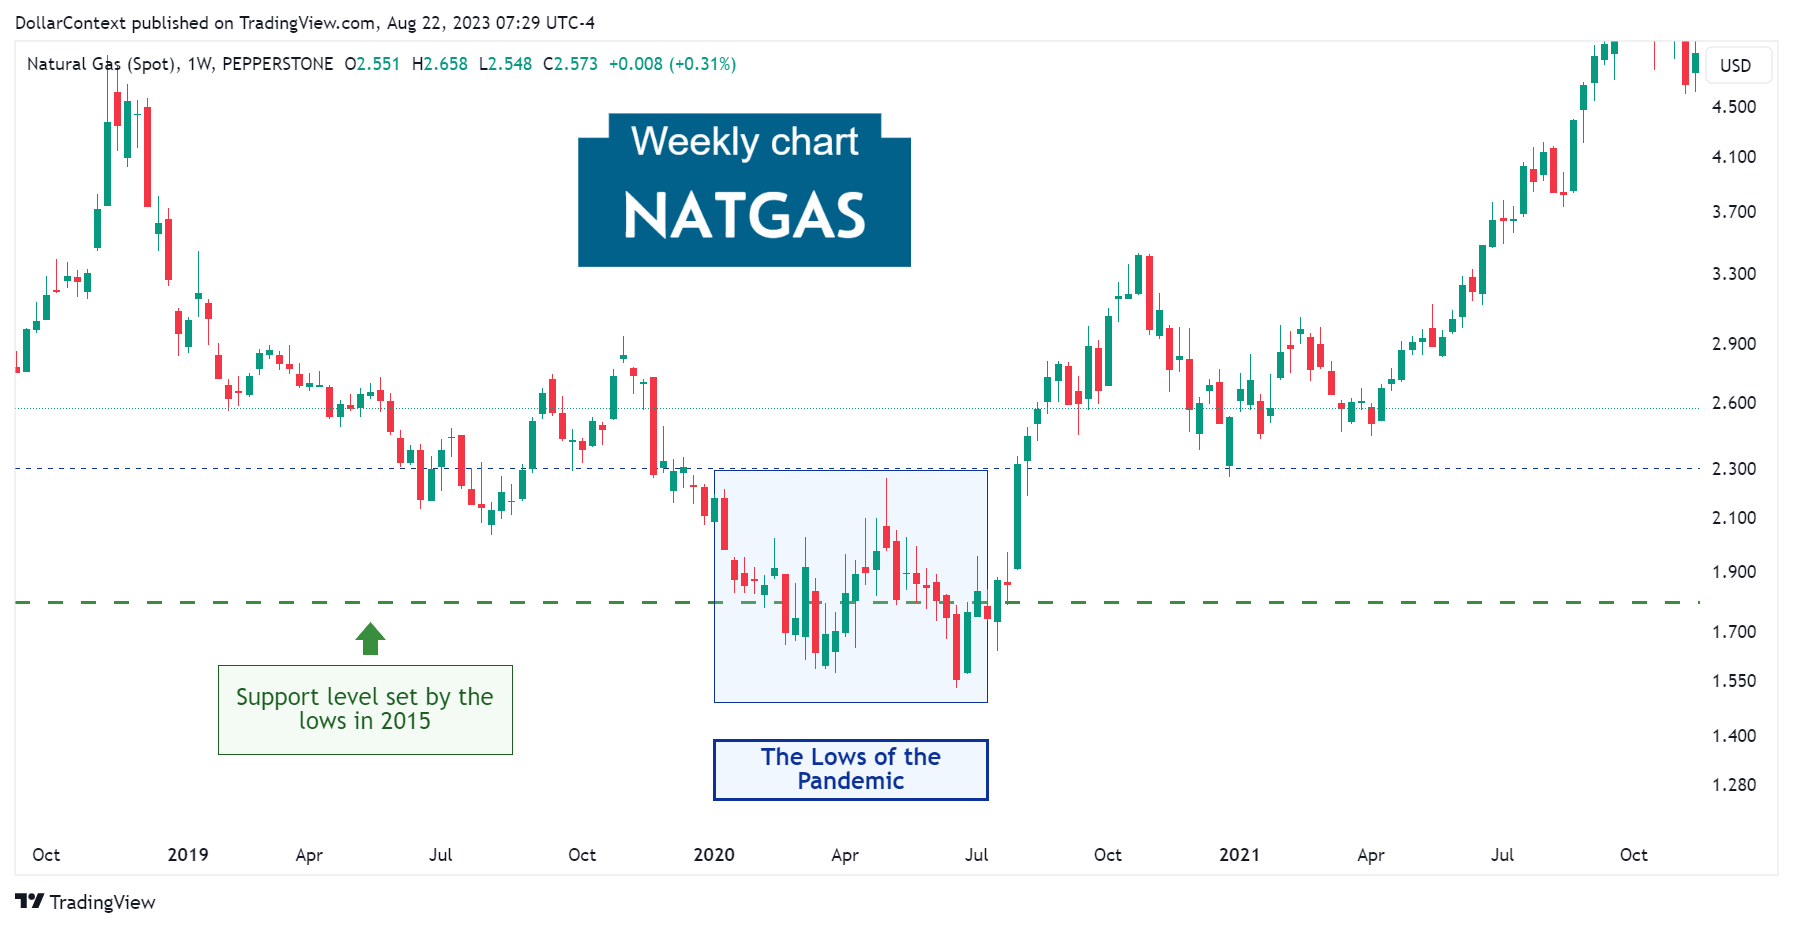 Natural Gas Spot: The Lows of the Pandemic (Weekly Chart)